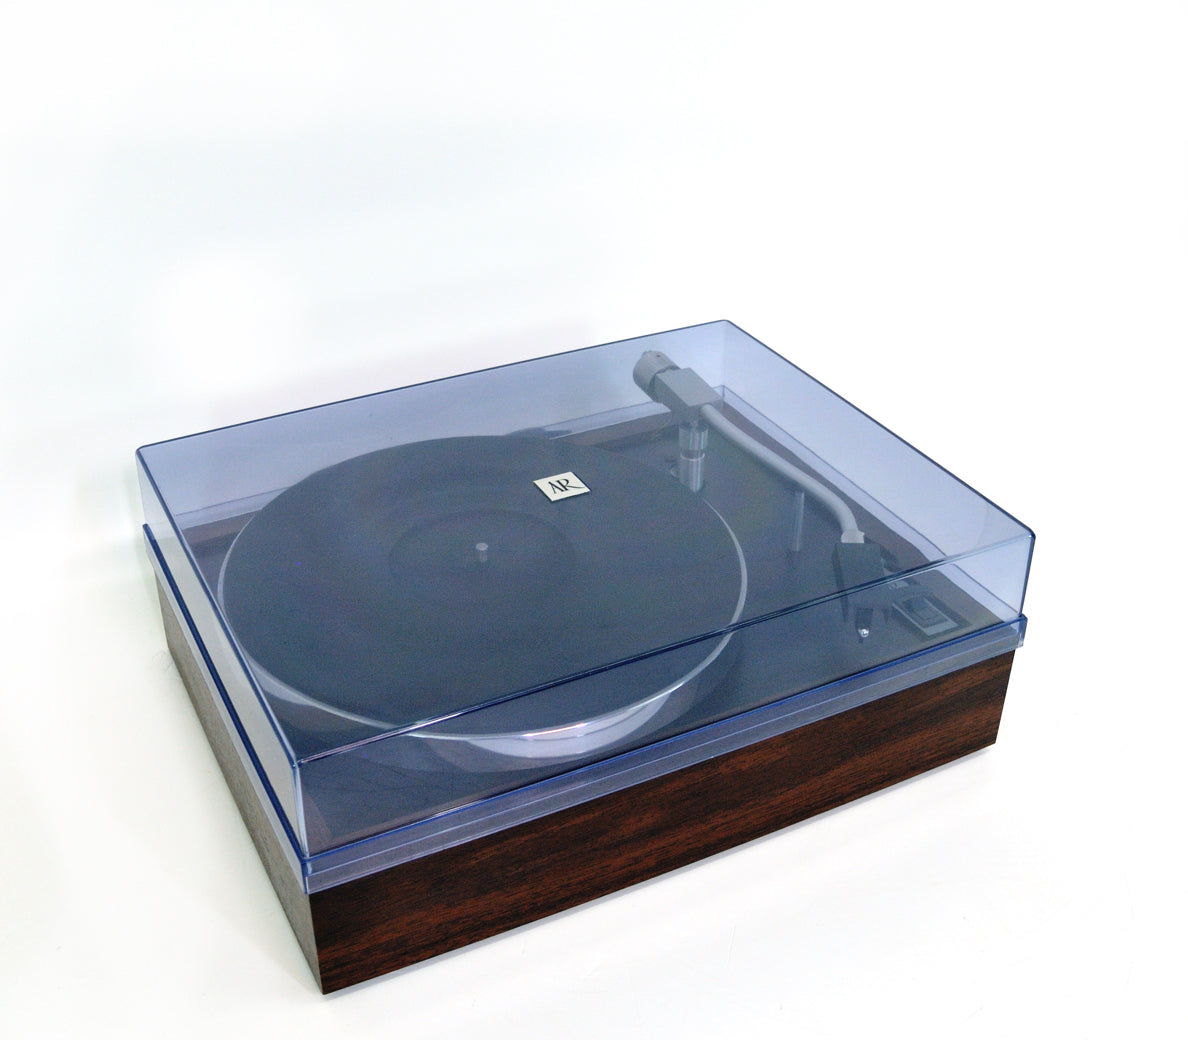 Acoustic Research XB1 turntable